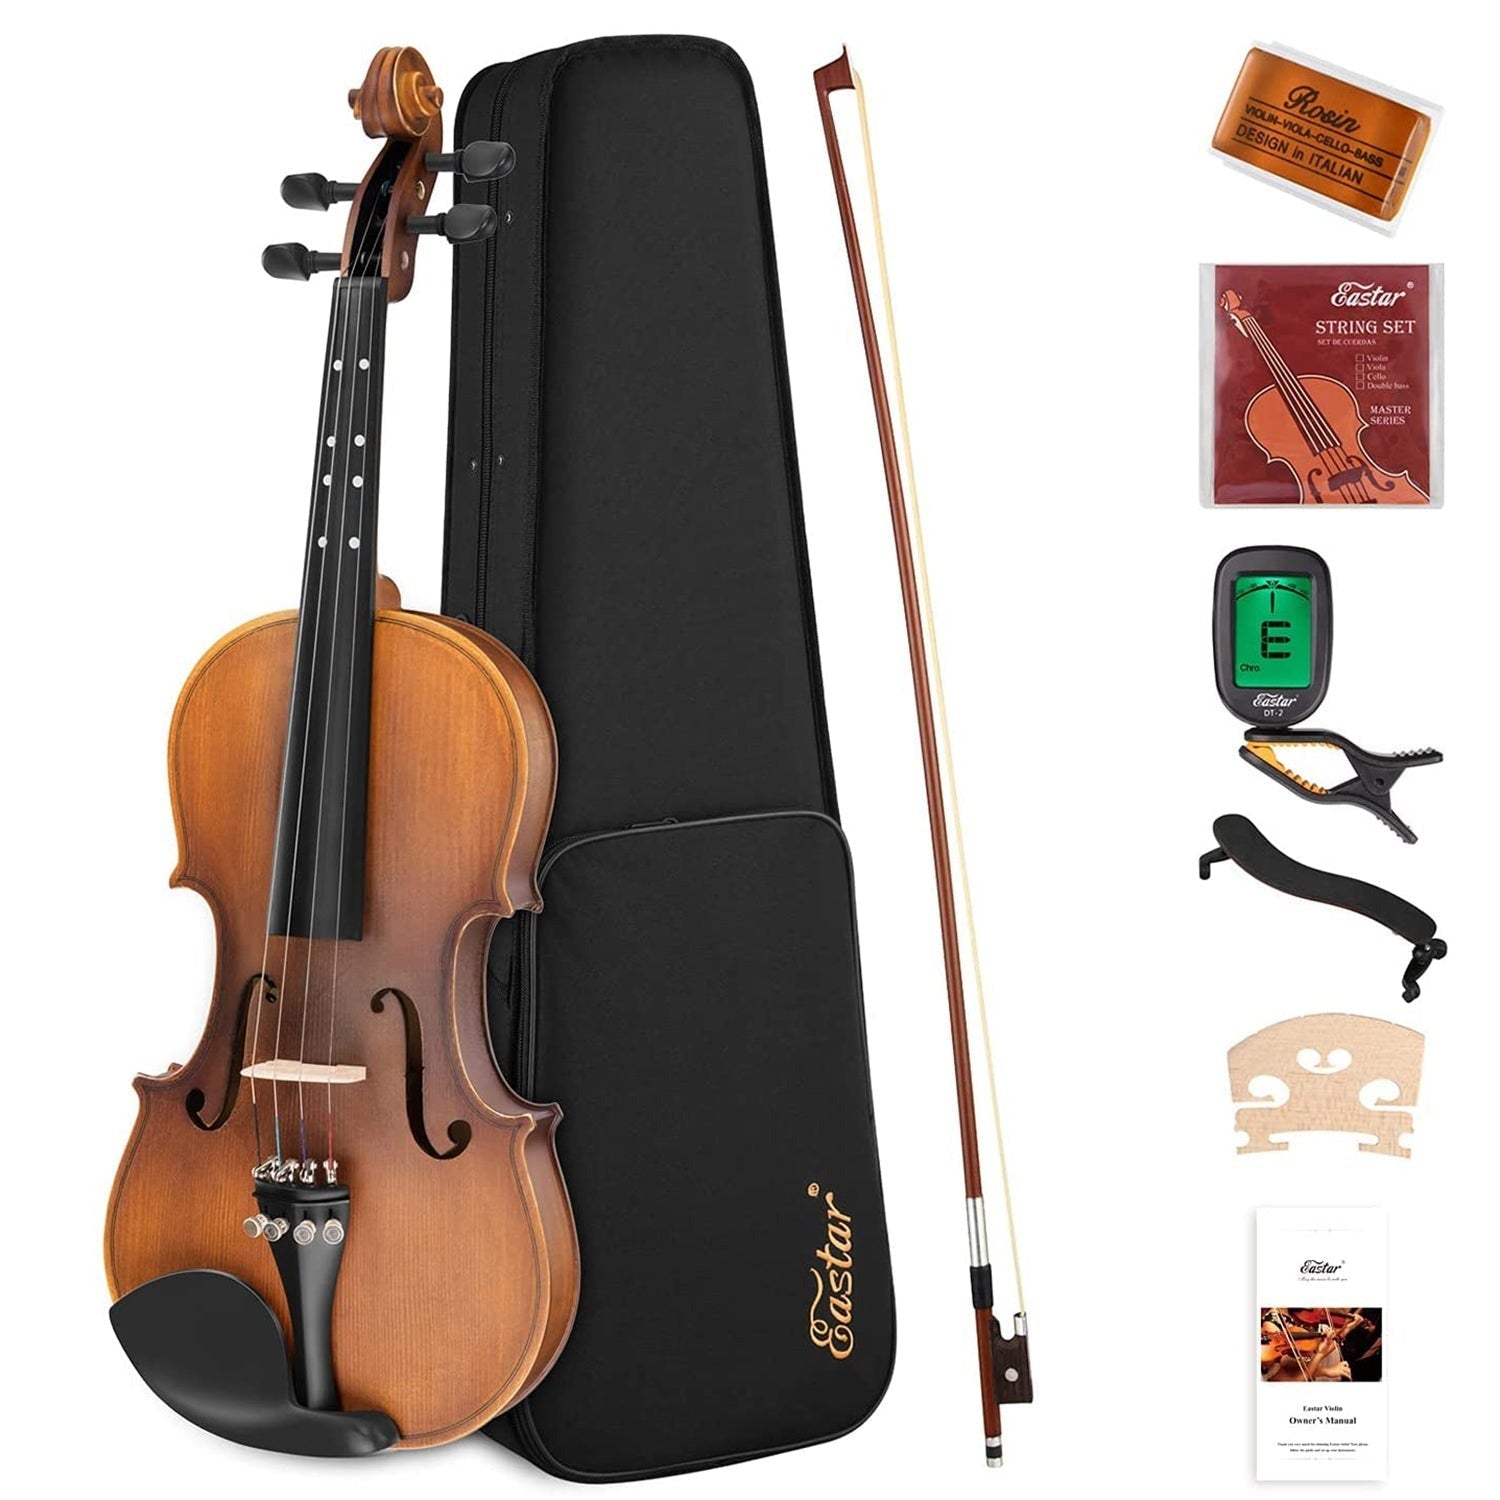 

Eastar EVA-3 1/4 Violin Set Matte Fiddle for Kids Beginners Students Adults with Hard Case, Rosin, Shoulder Rest, Bow, and Extra Strings